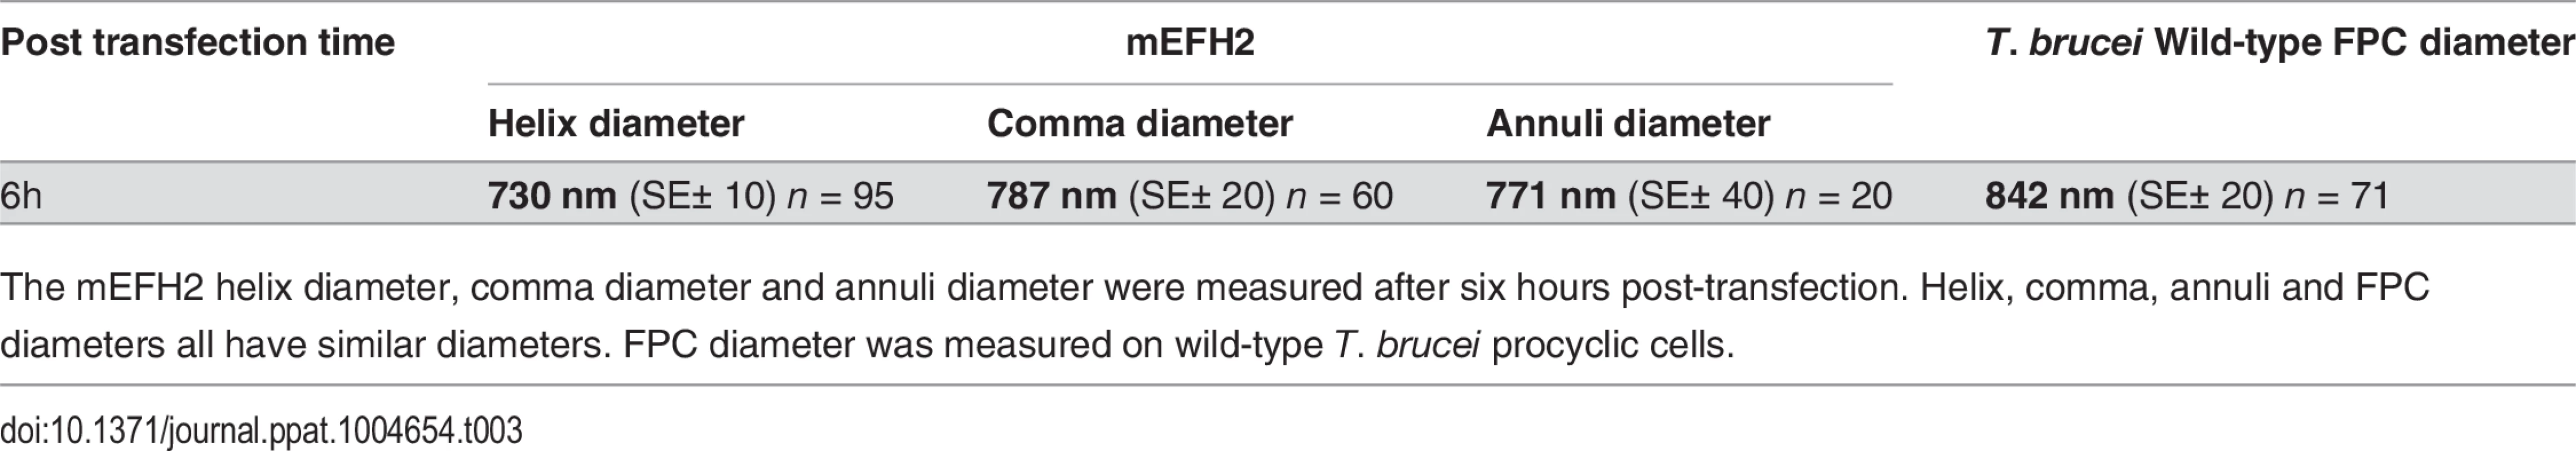 Mean mEFH2-induced helix, coma and annuli diameter after expression in U-2 OS cells and mean FPC diameter.